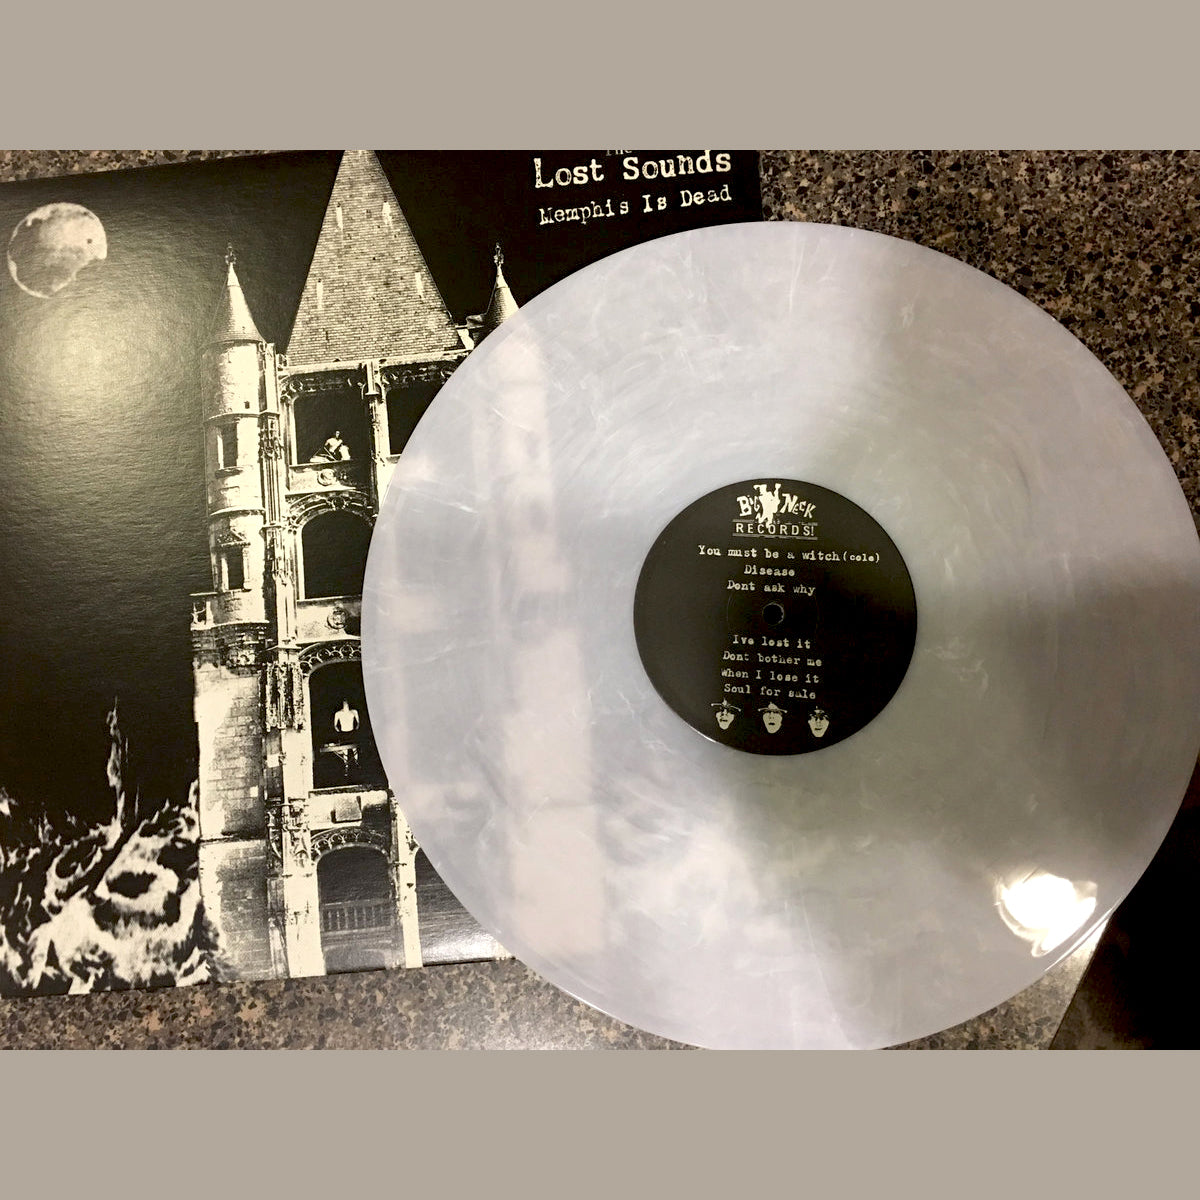 Lost Sounds- Memphis Is Dead LP ~RARE SMOKEY CLEAR WAX!